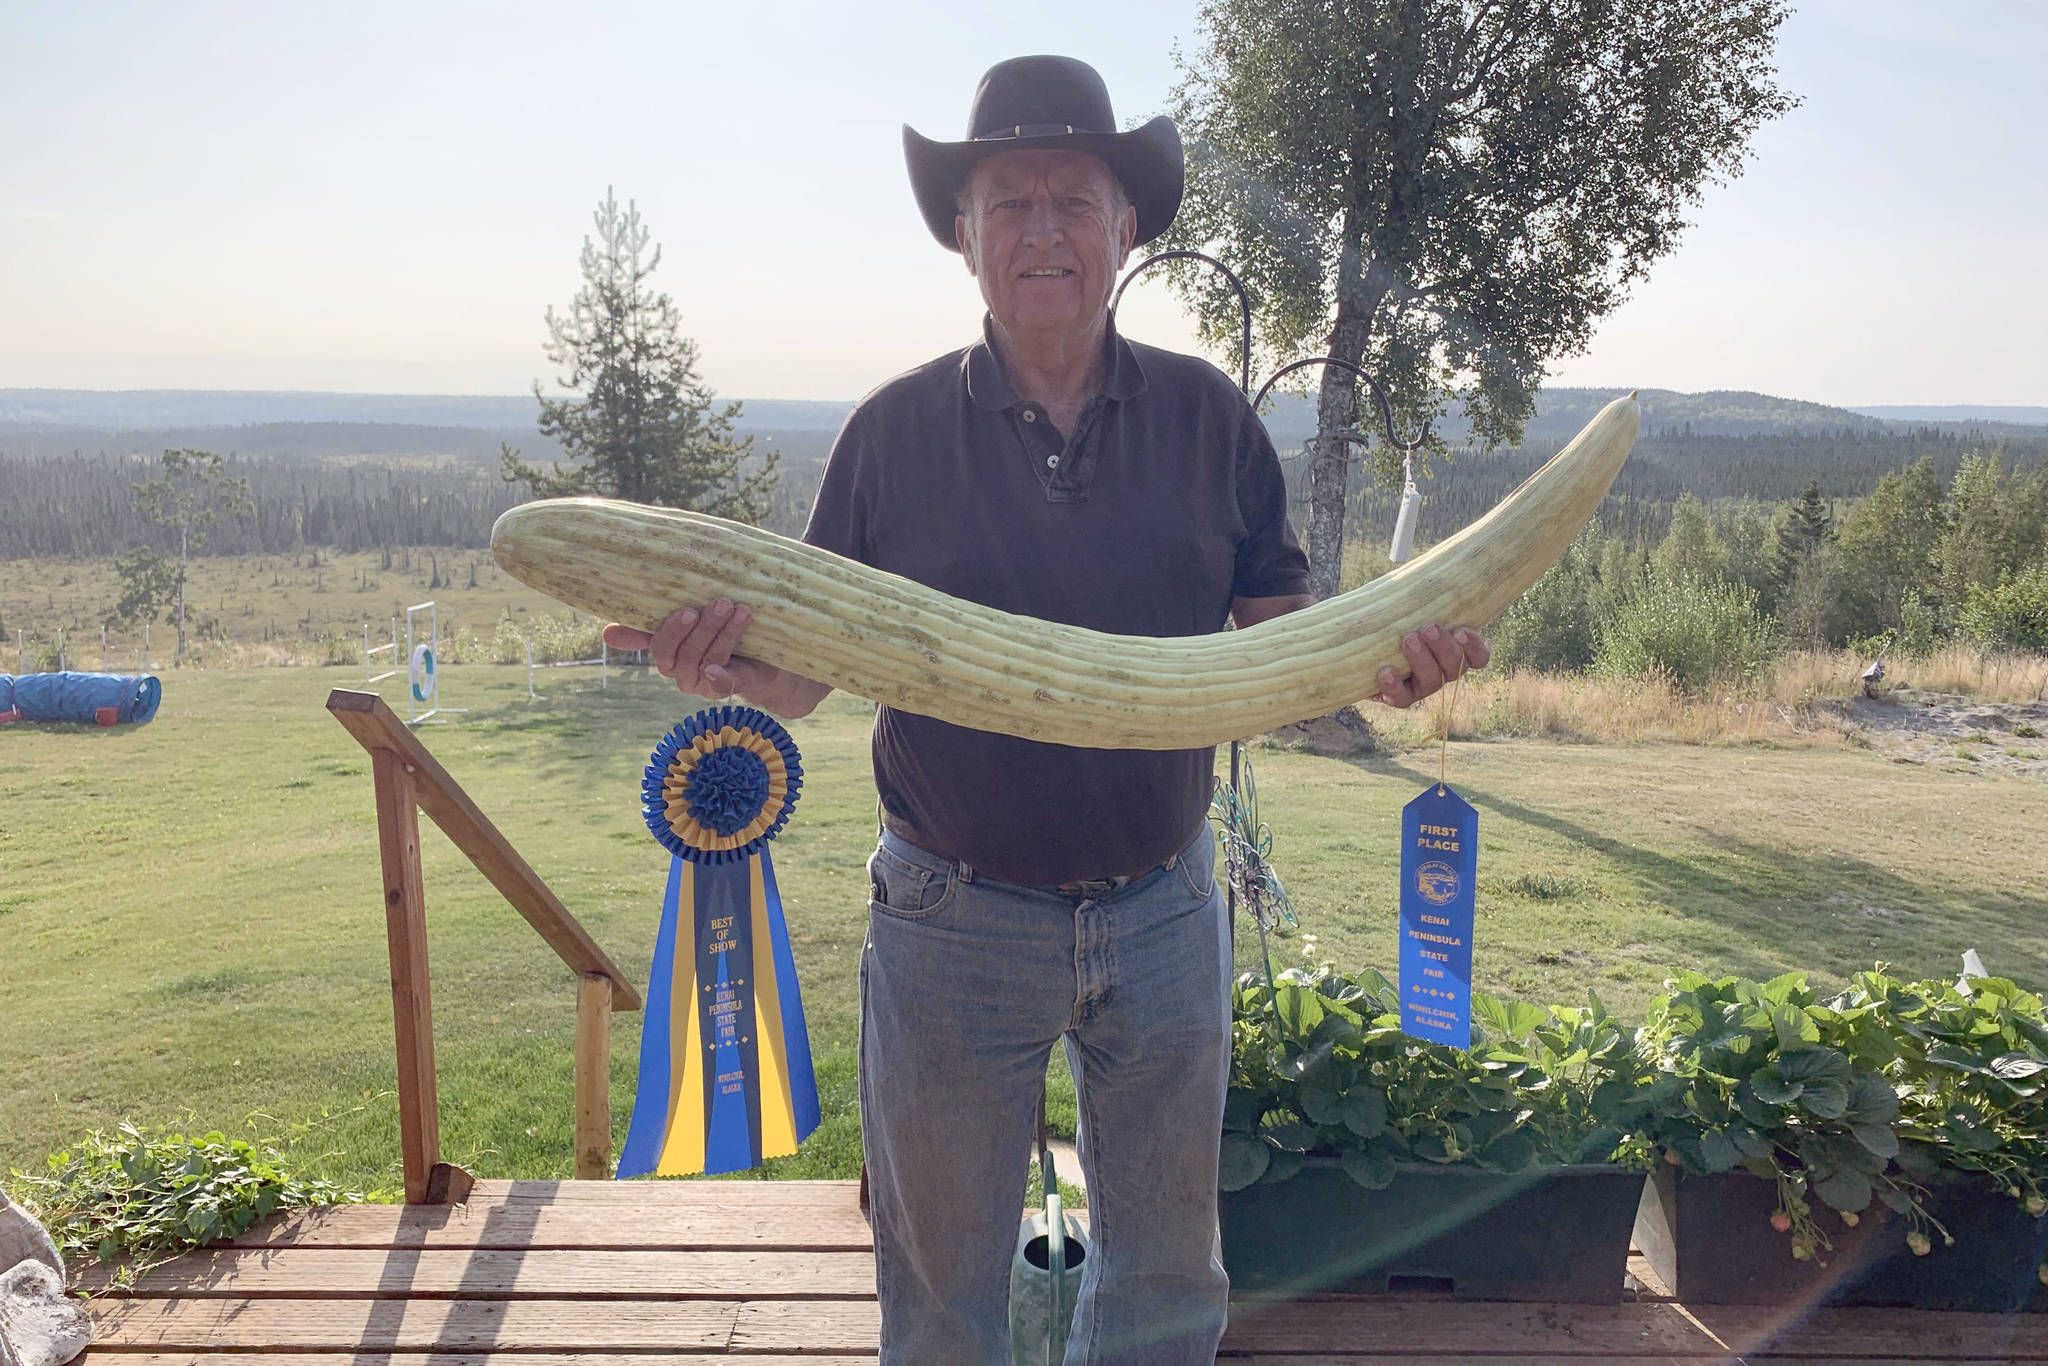 Soldotna, Alaska, resident Richard Link and his prize-winning Armenian cucumber are seen here in this August 2019 photo. The 14-pound, 37 3/8-inch cucumber took home grand prize at the 2019 Alaska State Fair in Palmer, Alaska. (Courtesy Ludy Link)